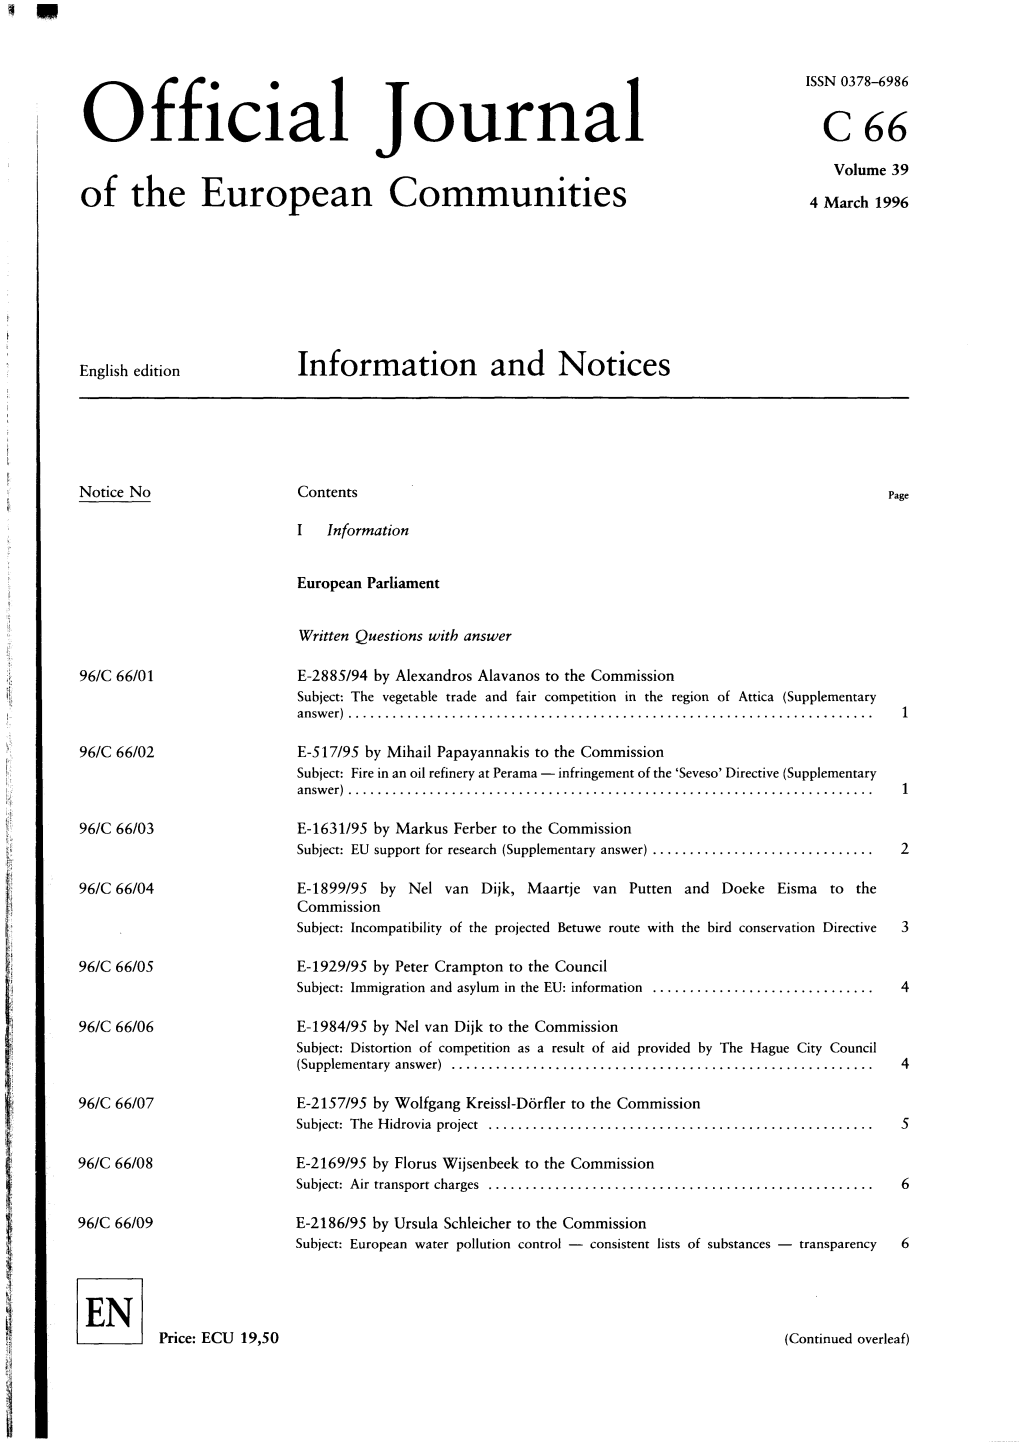 Official Journal C 66 Volume 39 of the European Communities 4 March 1996